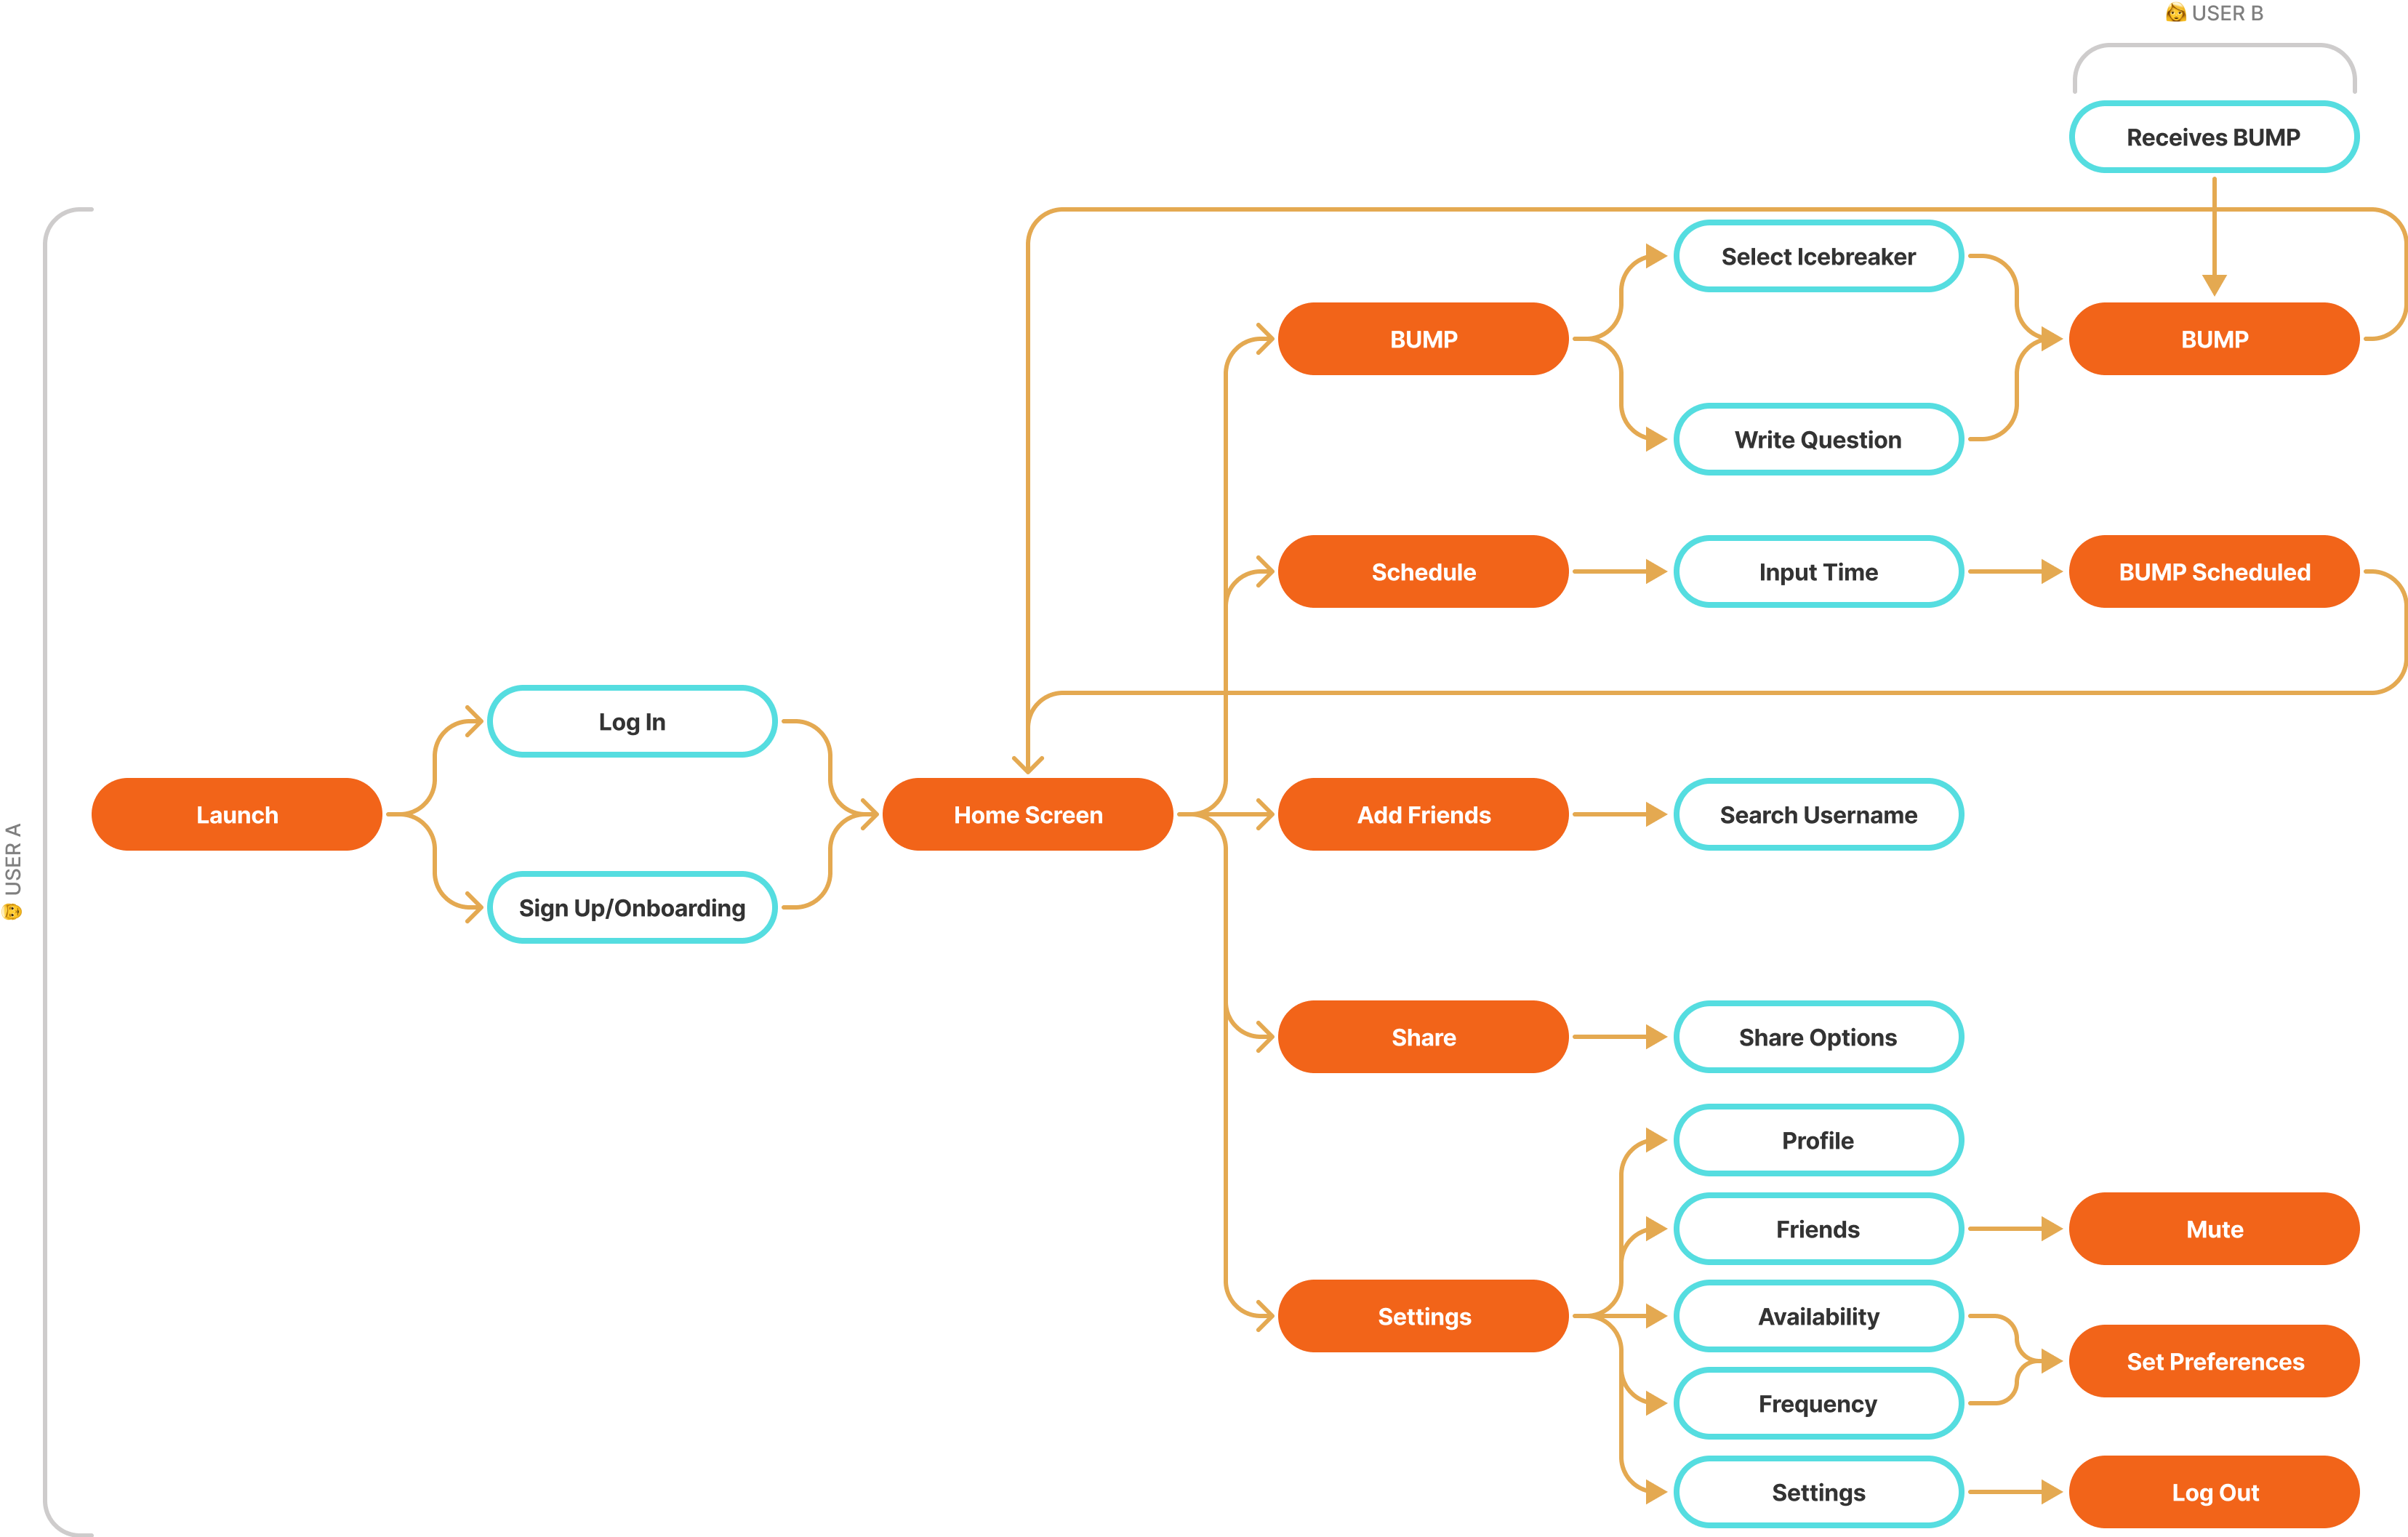 User flow diagram displaying the order and relationships of the screens